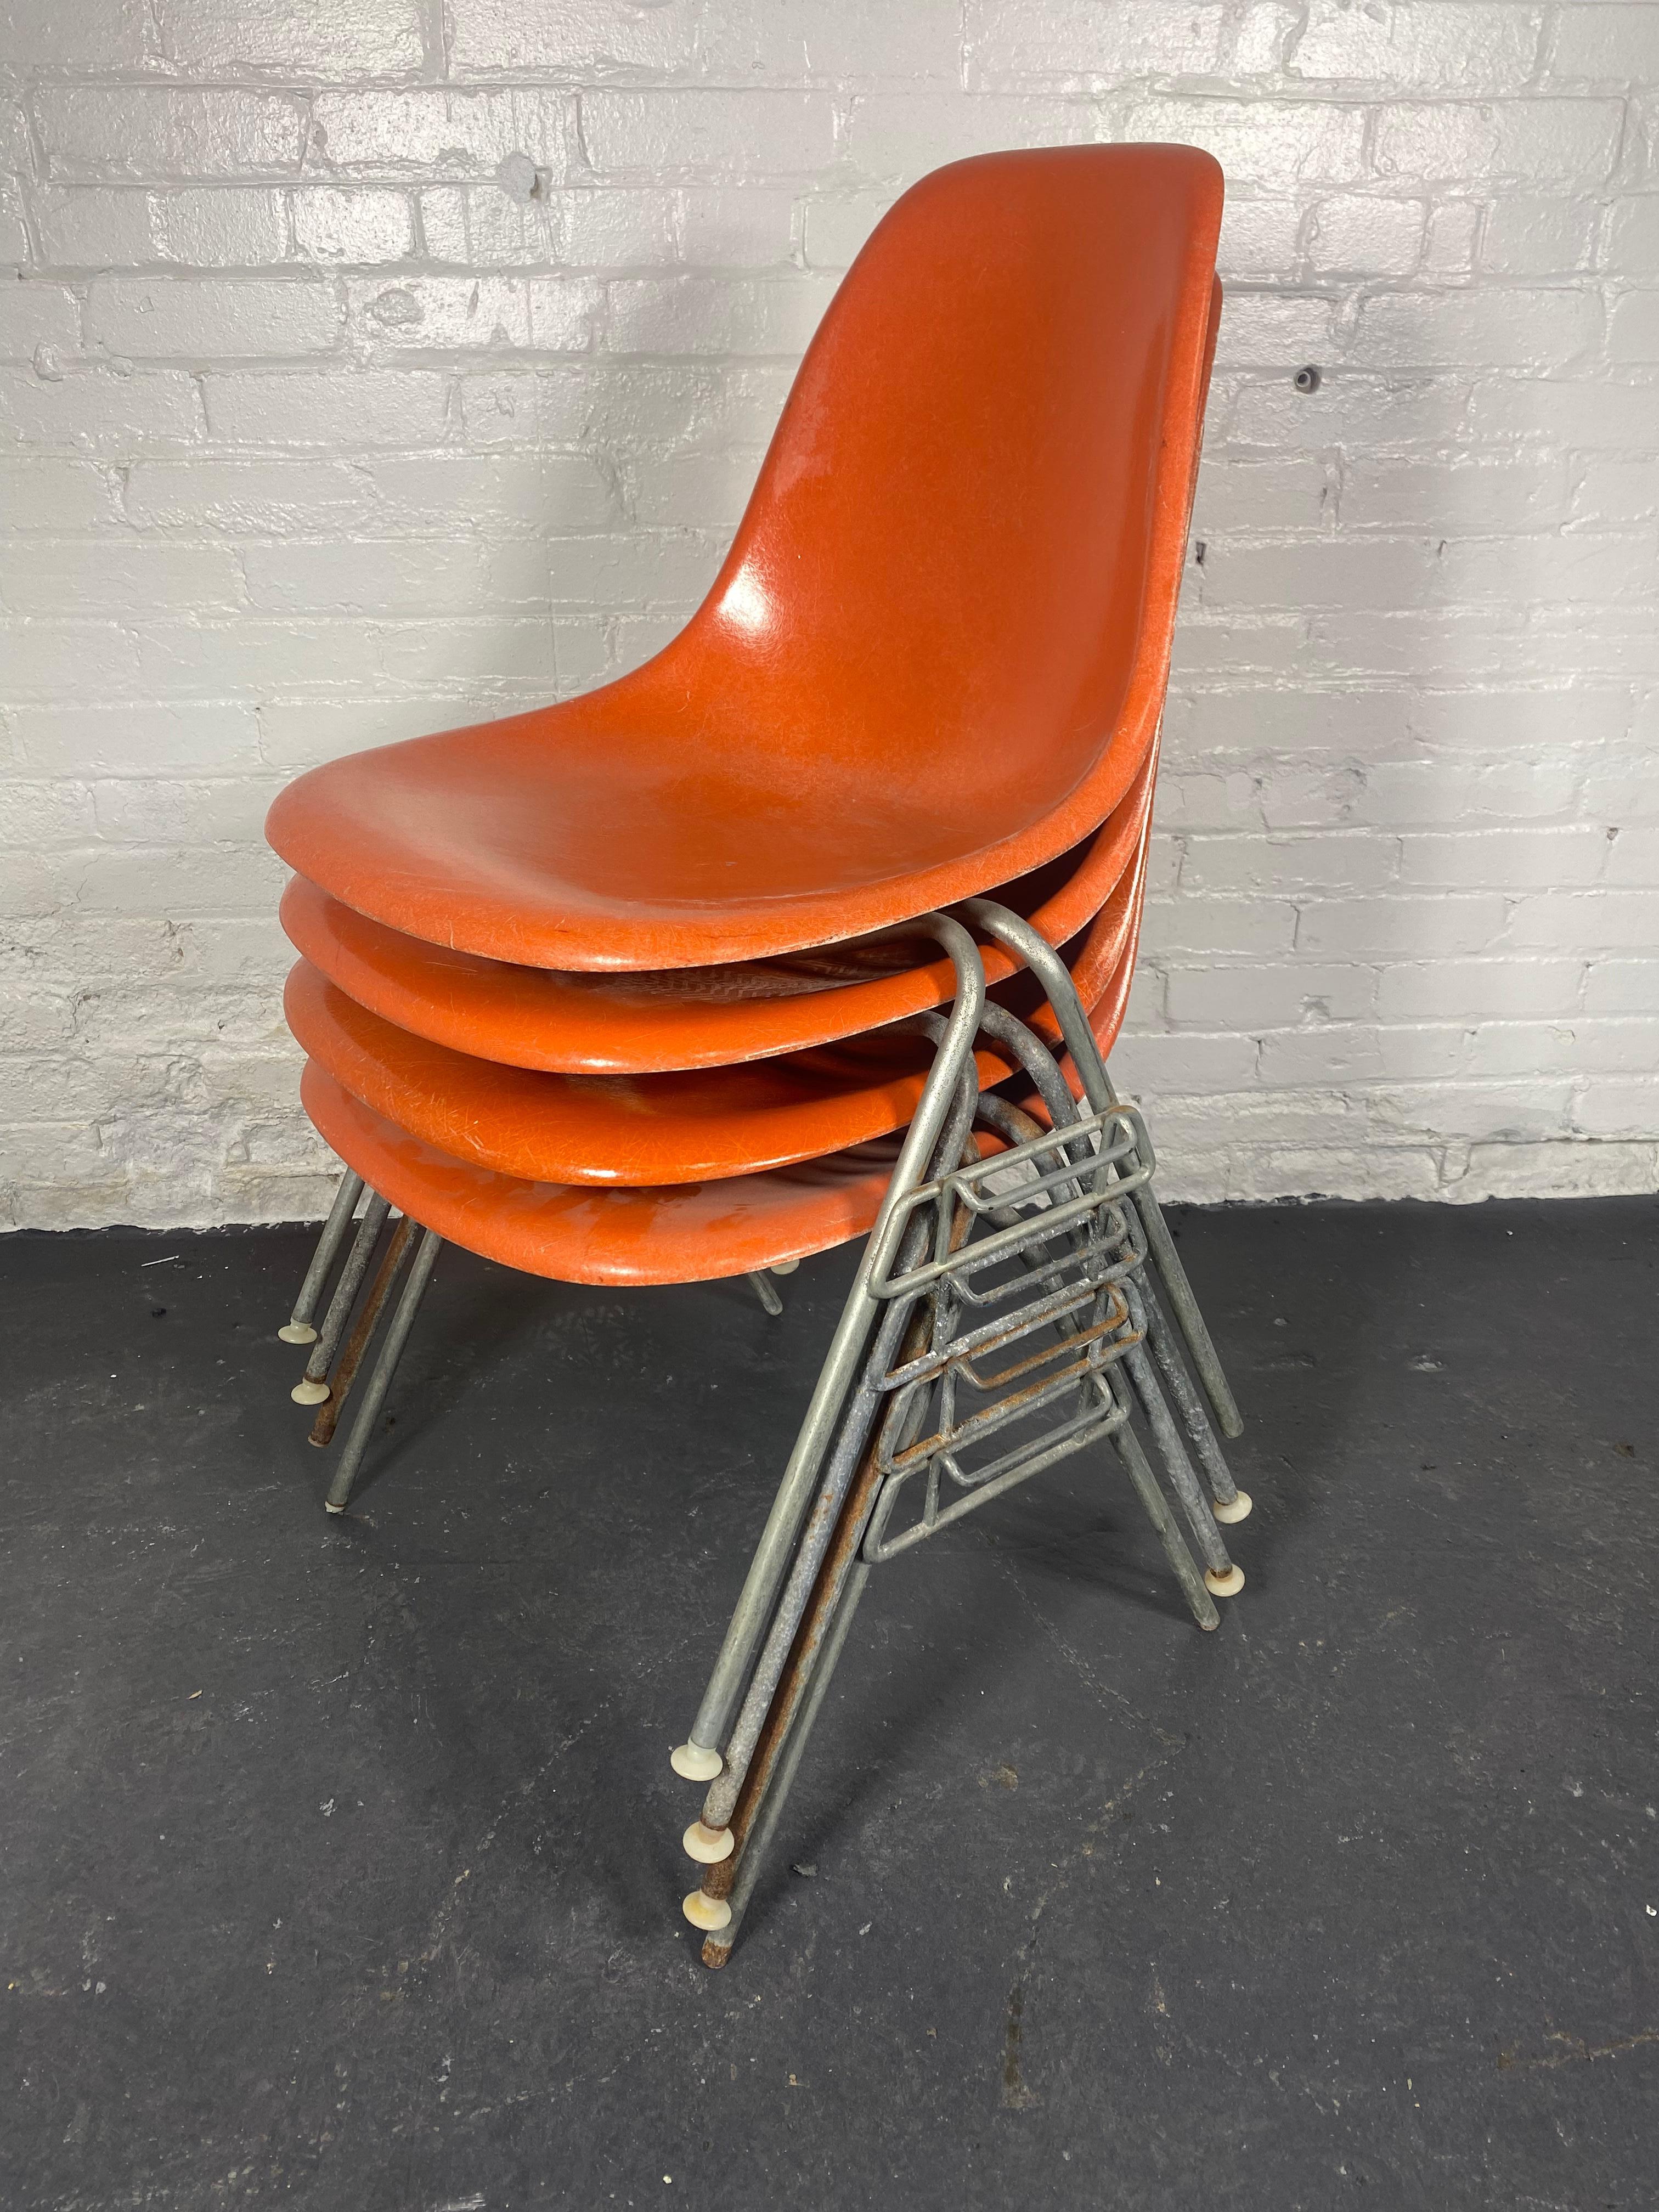 SET 4 DSS Stacking Chairs, Charles & Ray Eames, Herman Miller, Orange Fiberglass For Sale 2